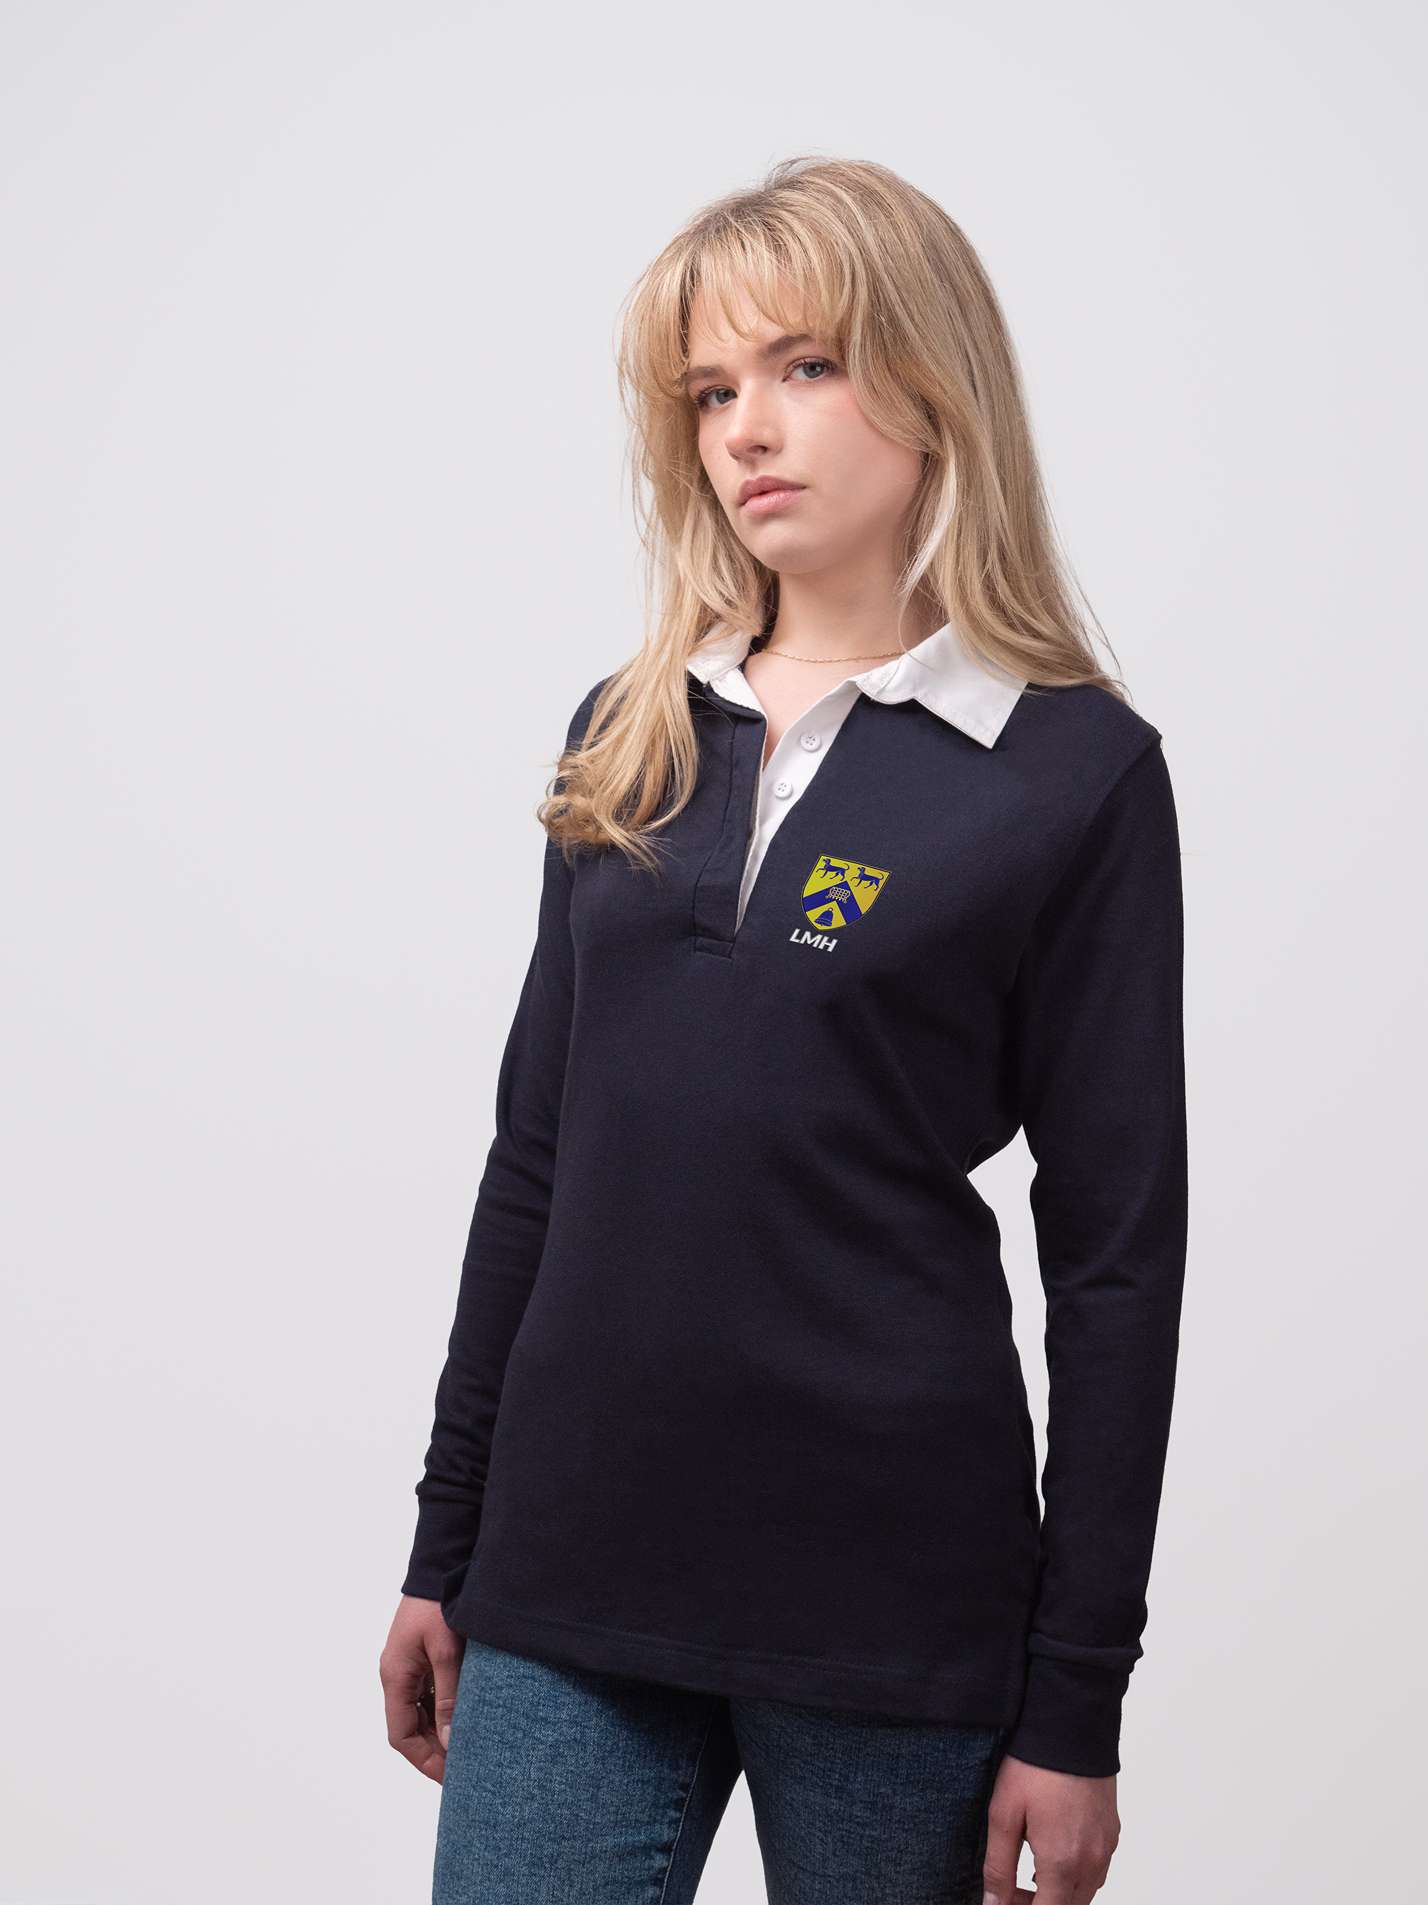 Lady Margaret Hall Oxford Classic Ladies Rugby Shirt